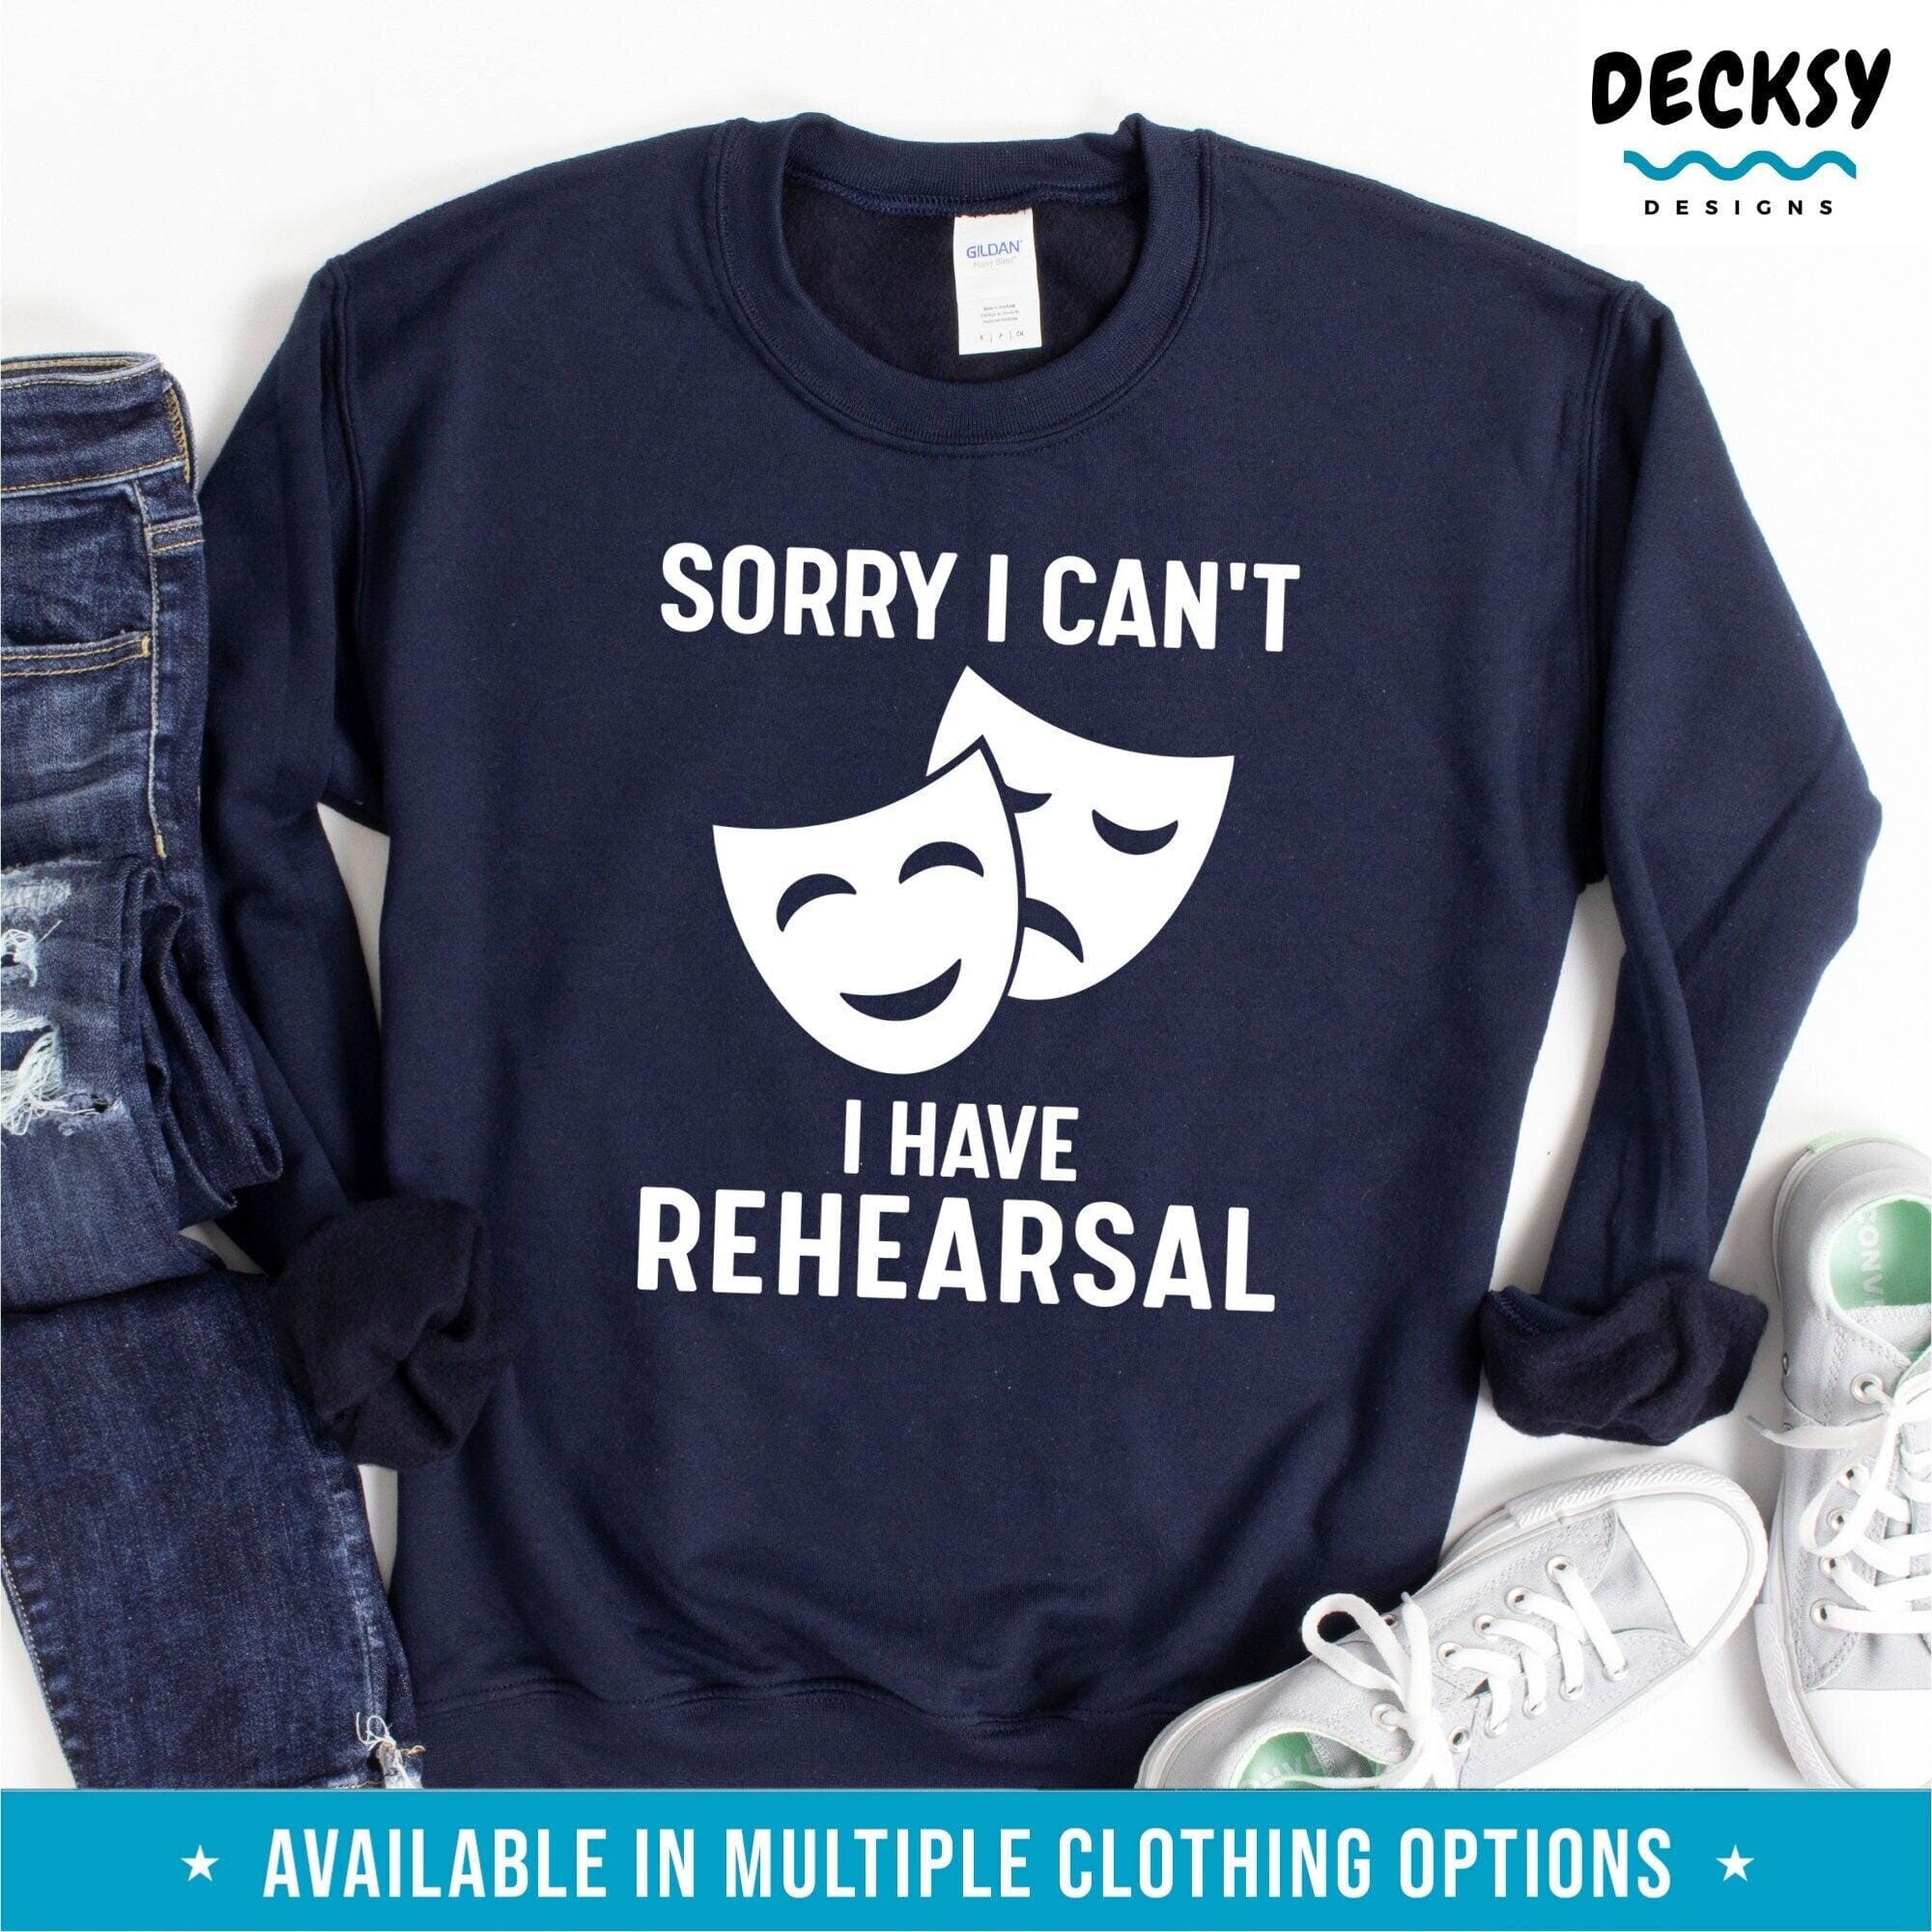 Theatre Shirt, Actor Gift-Clothing:Gender-Neutral Adult Clothing:Tops & Tees:T-shirts:Graphic Tees-DecksyDesigns